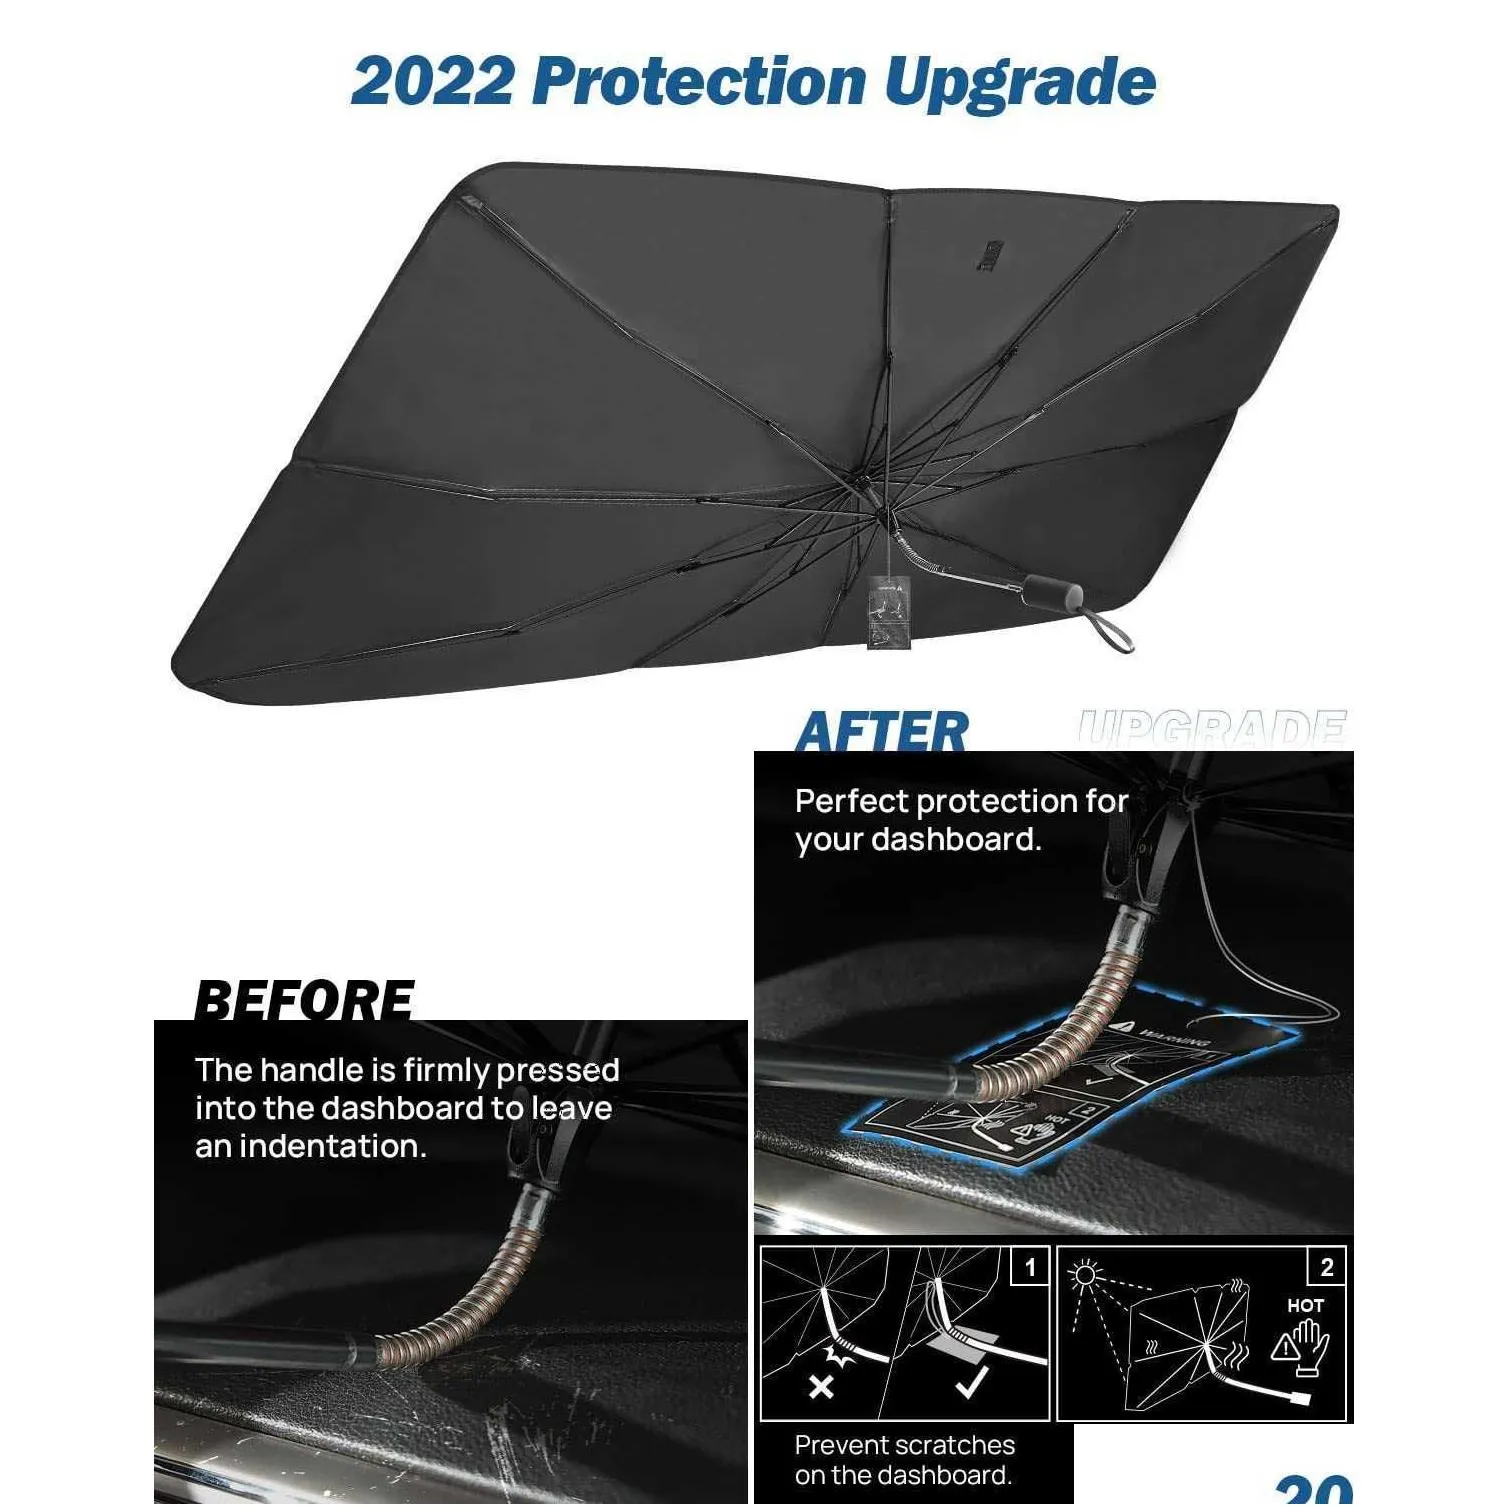 upgraded temporary window sun blocker front car windshield sun shade umbrella most vehicles with 360ﾰrotation bendable handle foldable